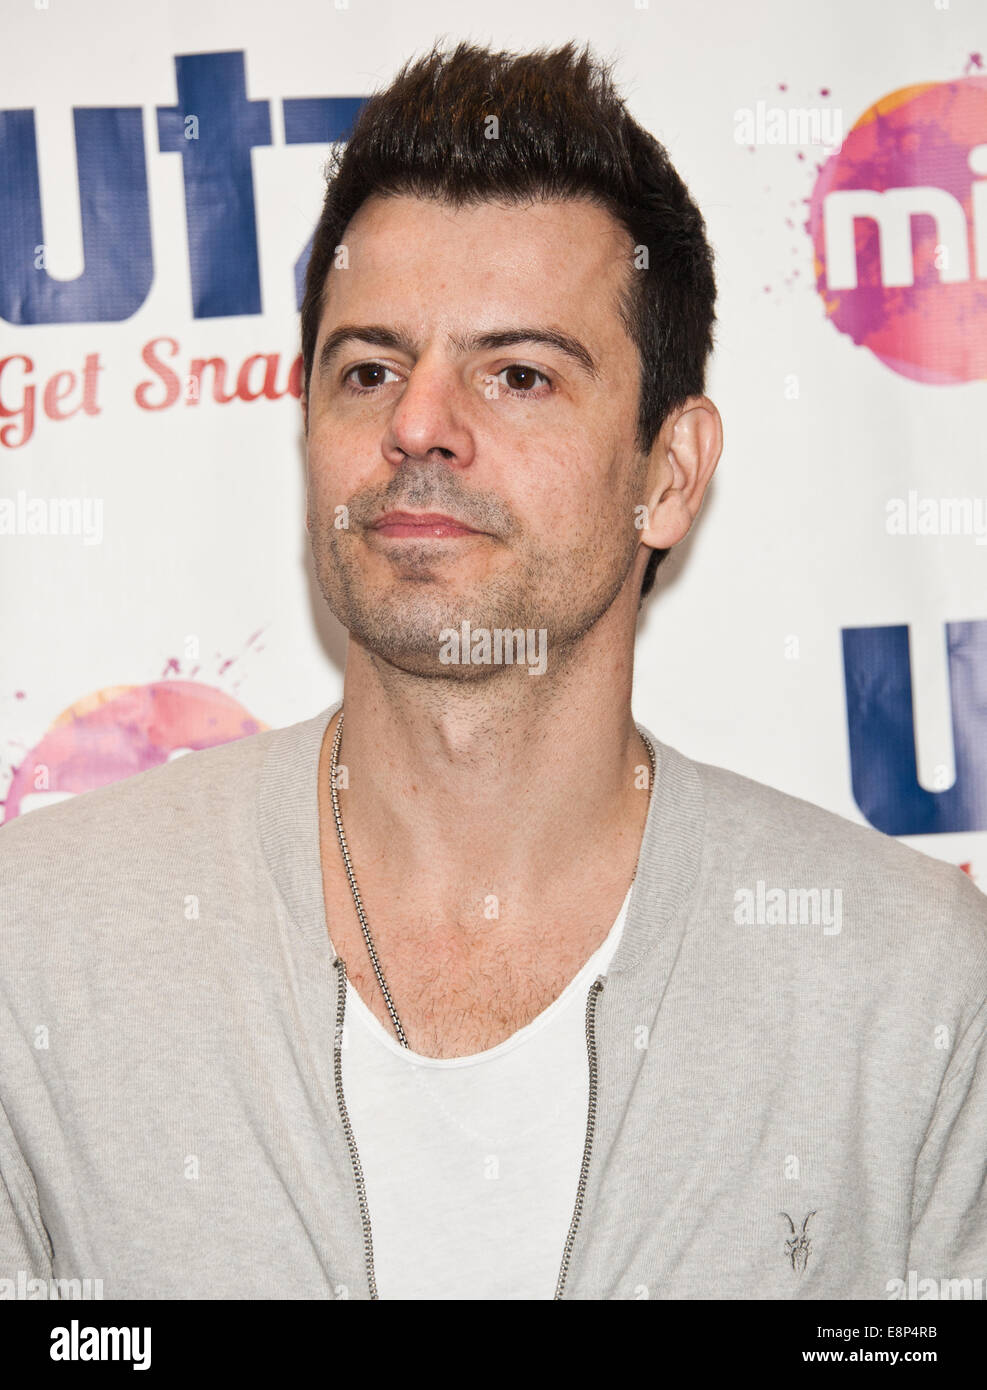 Bala Cynwyd, Pennsylvania, USA. 12th October, 2014. Jordan Knight of American Pop Rock Duo Nick & Knight Poses at Mix 106's Performance Theatre on October 12, 2014 in Bala Cynwyd, Pennsylvania, United States. Credit:  Paul Froggatt/Alamy Live News Stock Photo